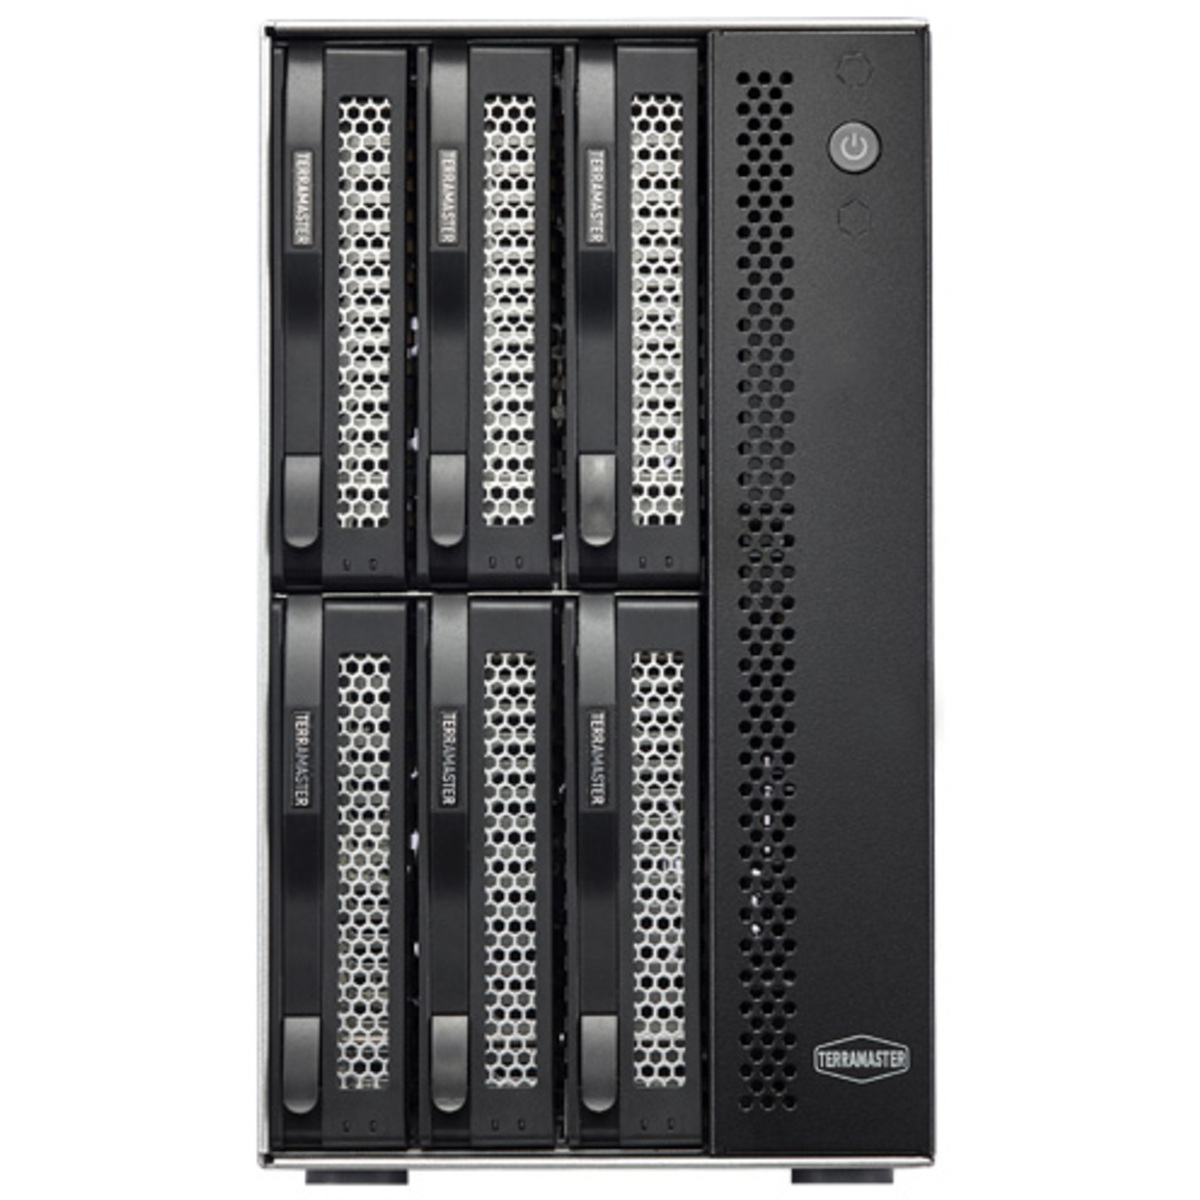 TerraMaster T6-423 96tb 6-Bay Desktop Multimedia / Power User / Business NAS - Network Attached Storage Device 4x24tb Western Digital Ultrastar HC580 SED WUH722424ALE6L1 3.5 7200rpm SATA 6Gb/s HDD ENTERPRISE Class Drives Installed - Burn-In Tested - FREE RAM UPGRADE T6-423